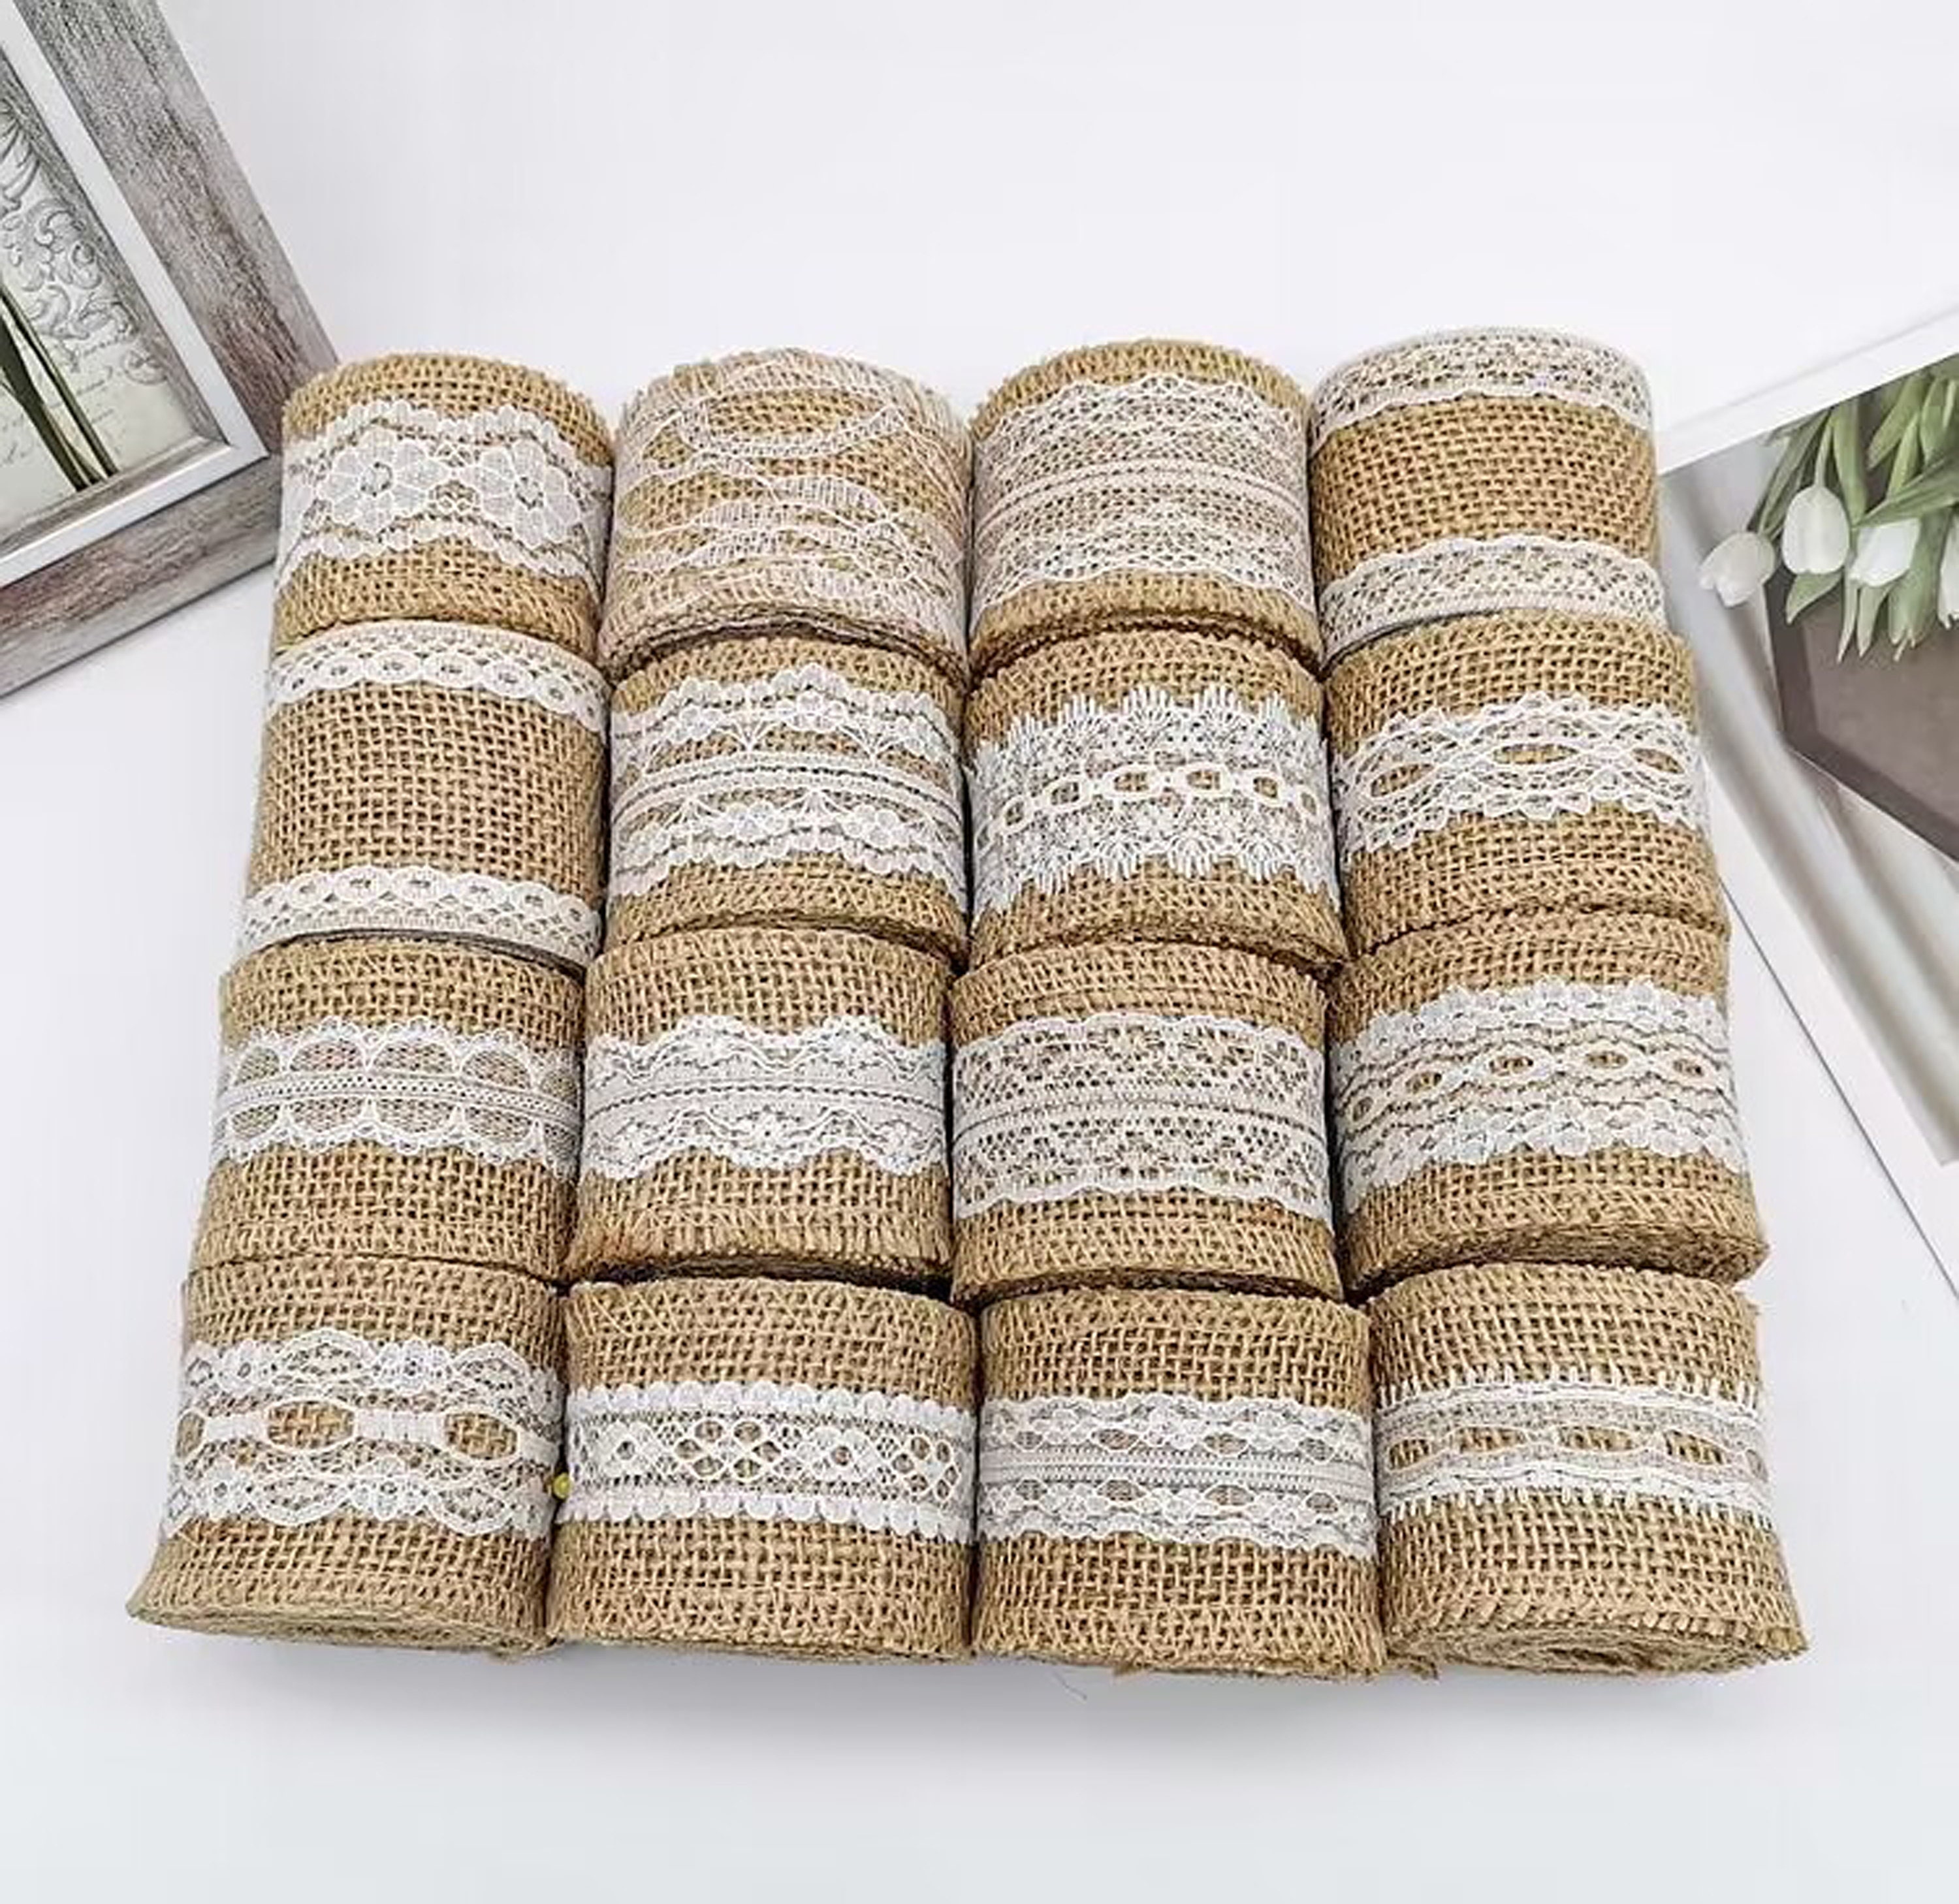 Burlap Roll Lace Lace Jute Roll Burlaps For Diy Home Wedding